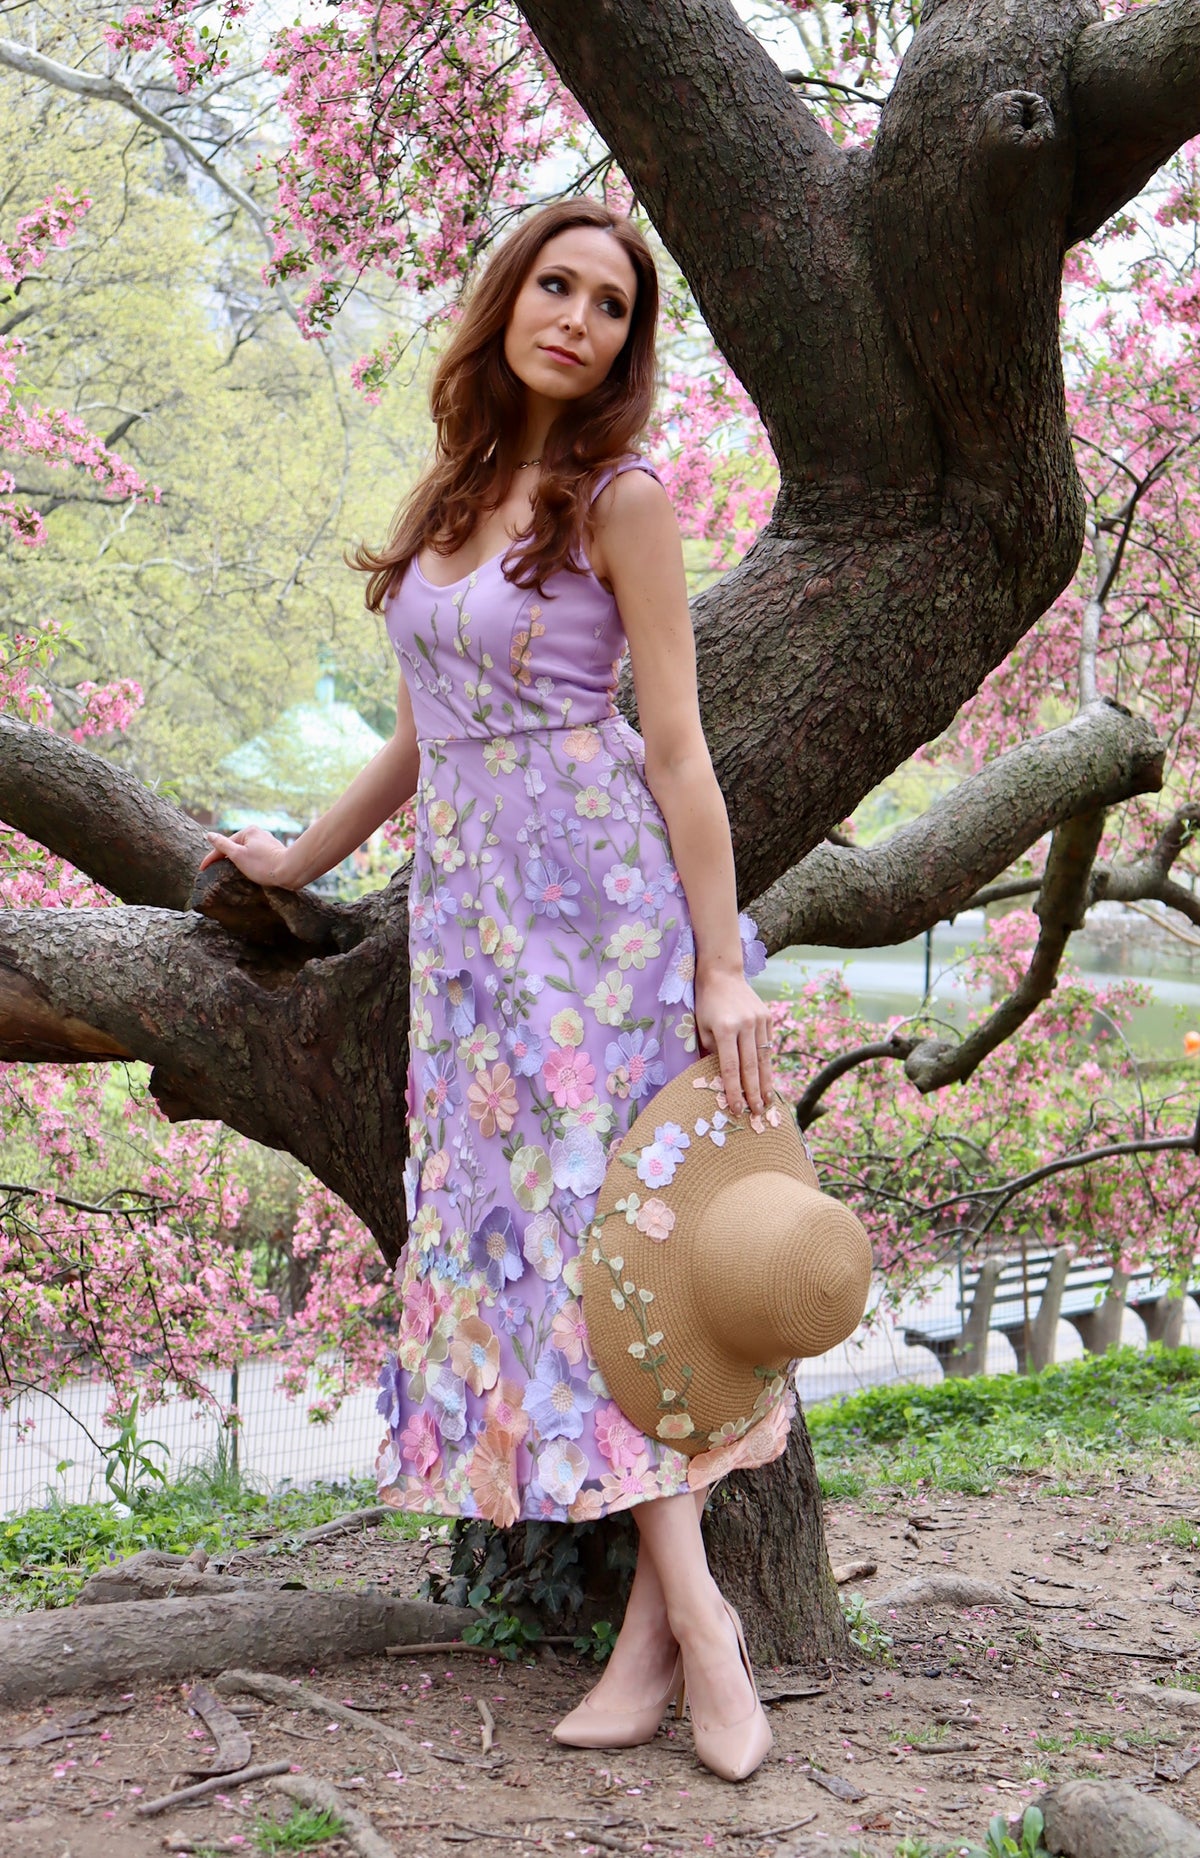 Model leaning on cherry blossom tree with sleeveless lilac midi length floral appliquéd dress with straw sun hat with floral appliques in hand to show aerial view of hat.